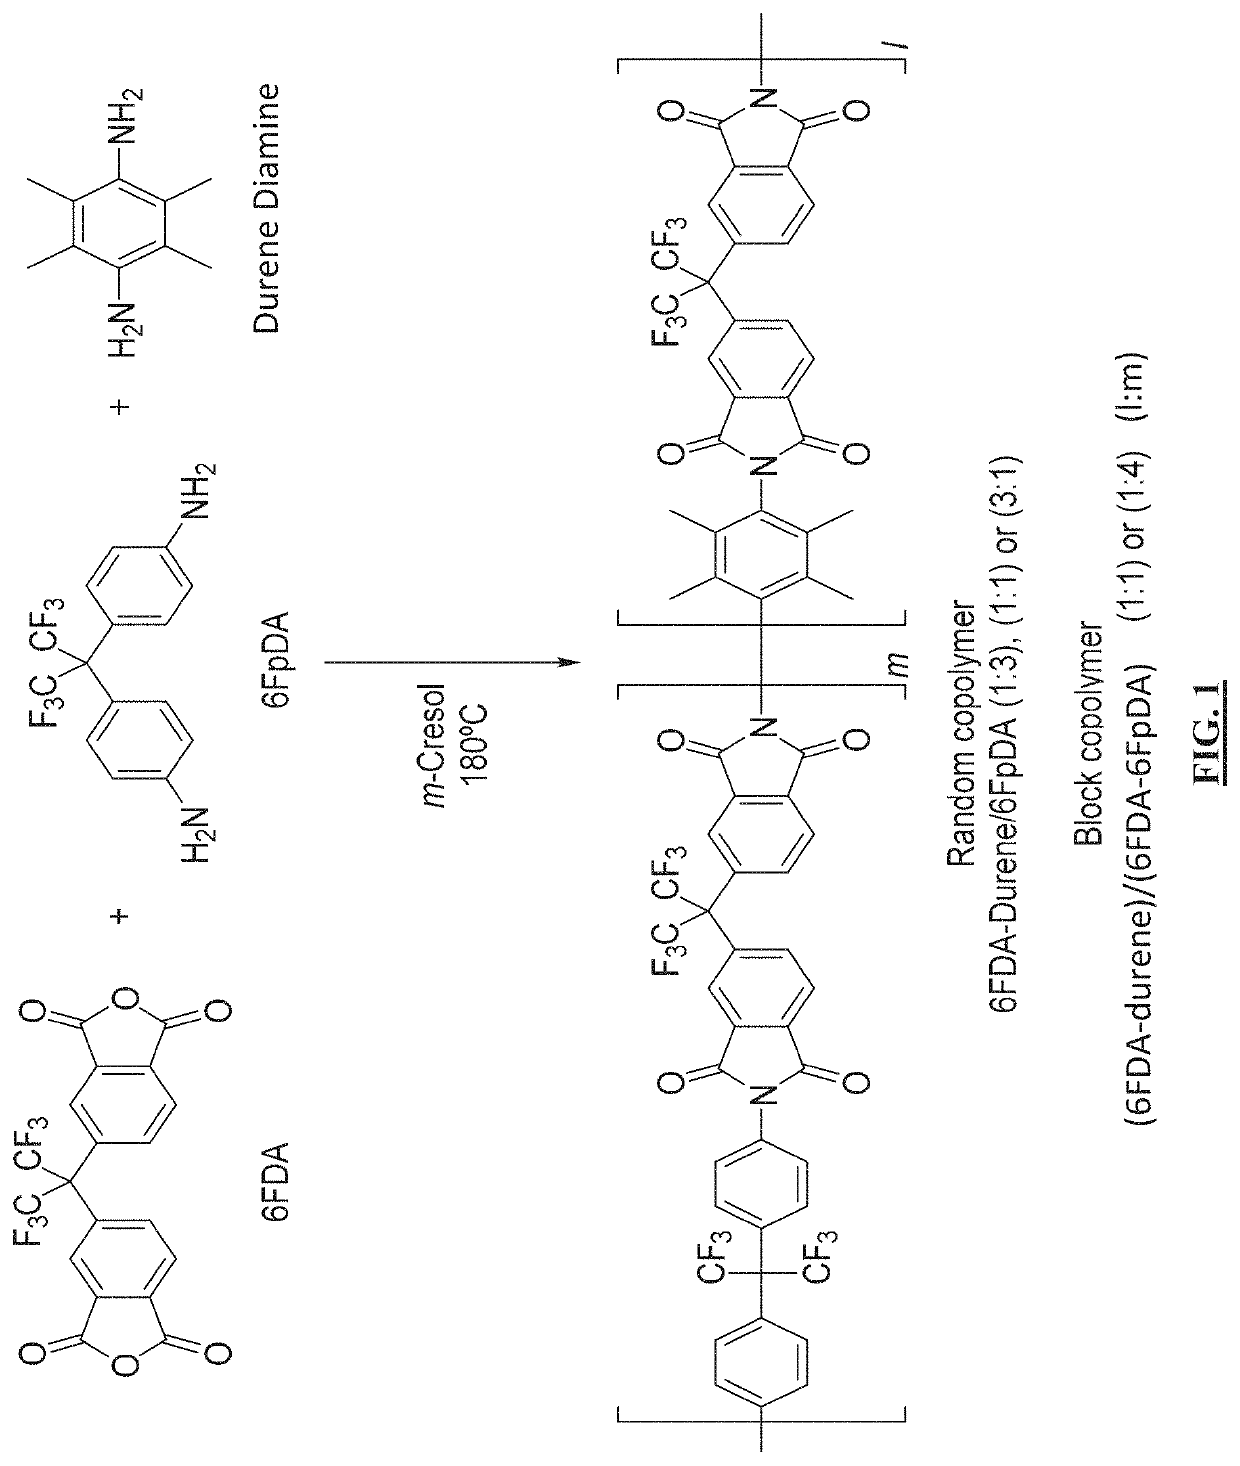 Aromatic co-polyimide gas separation membranes derived from 6FDA-6FpDA-type homo-polyimides